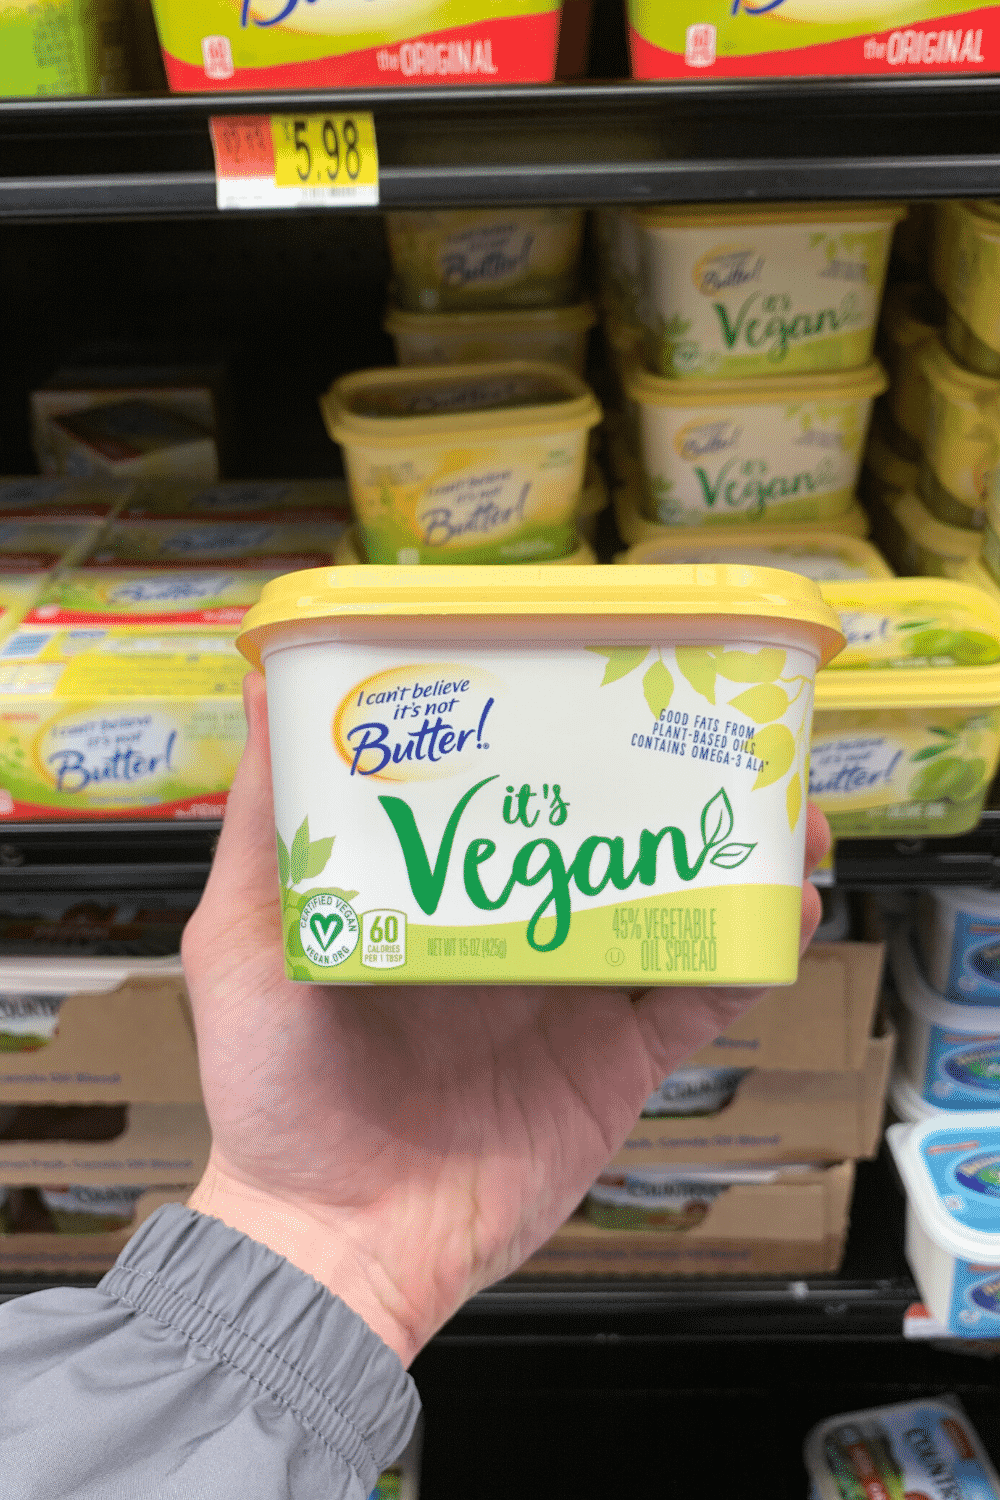 A hand holding I can't believe it's not butter it's vegan.